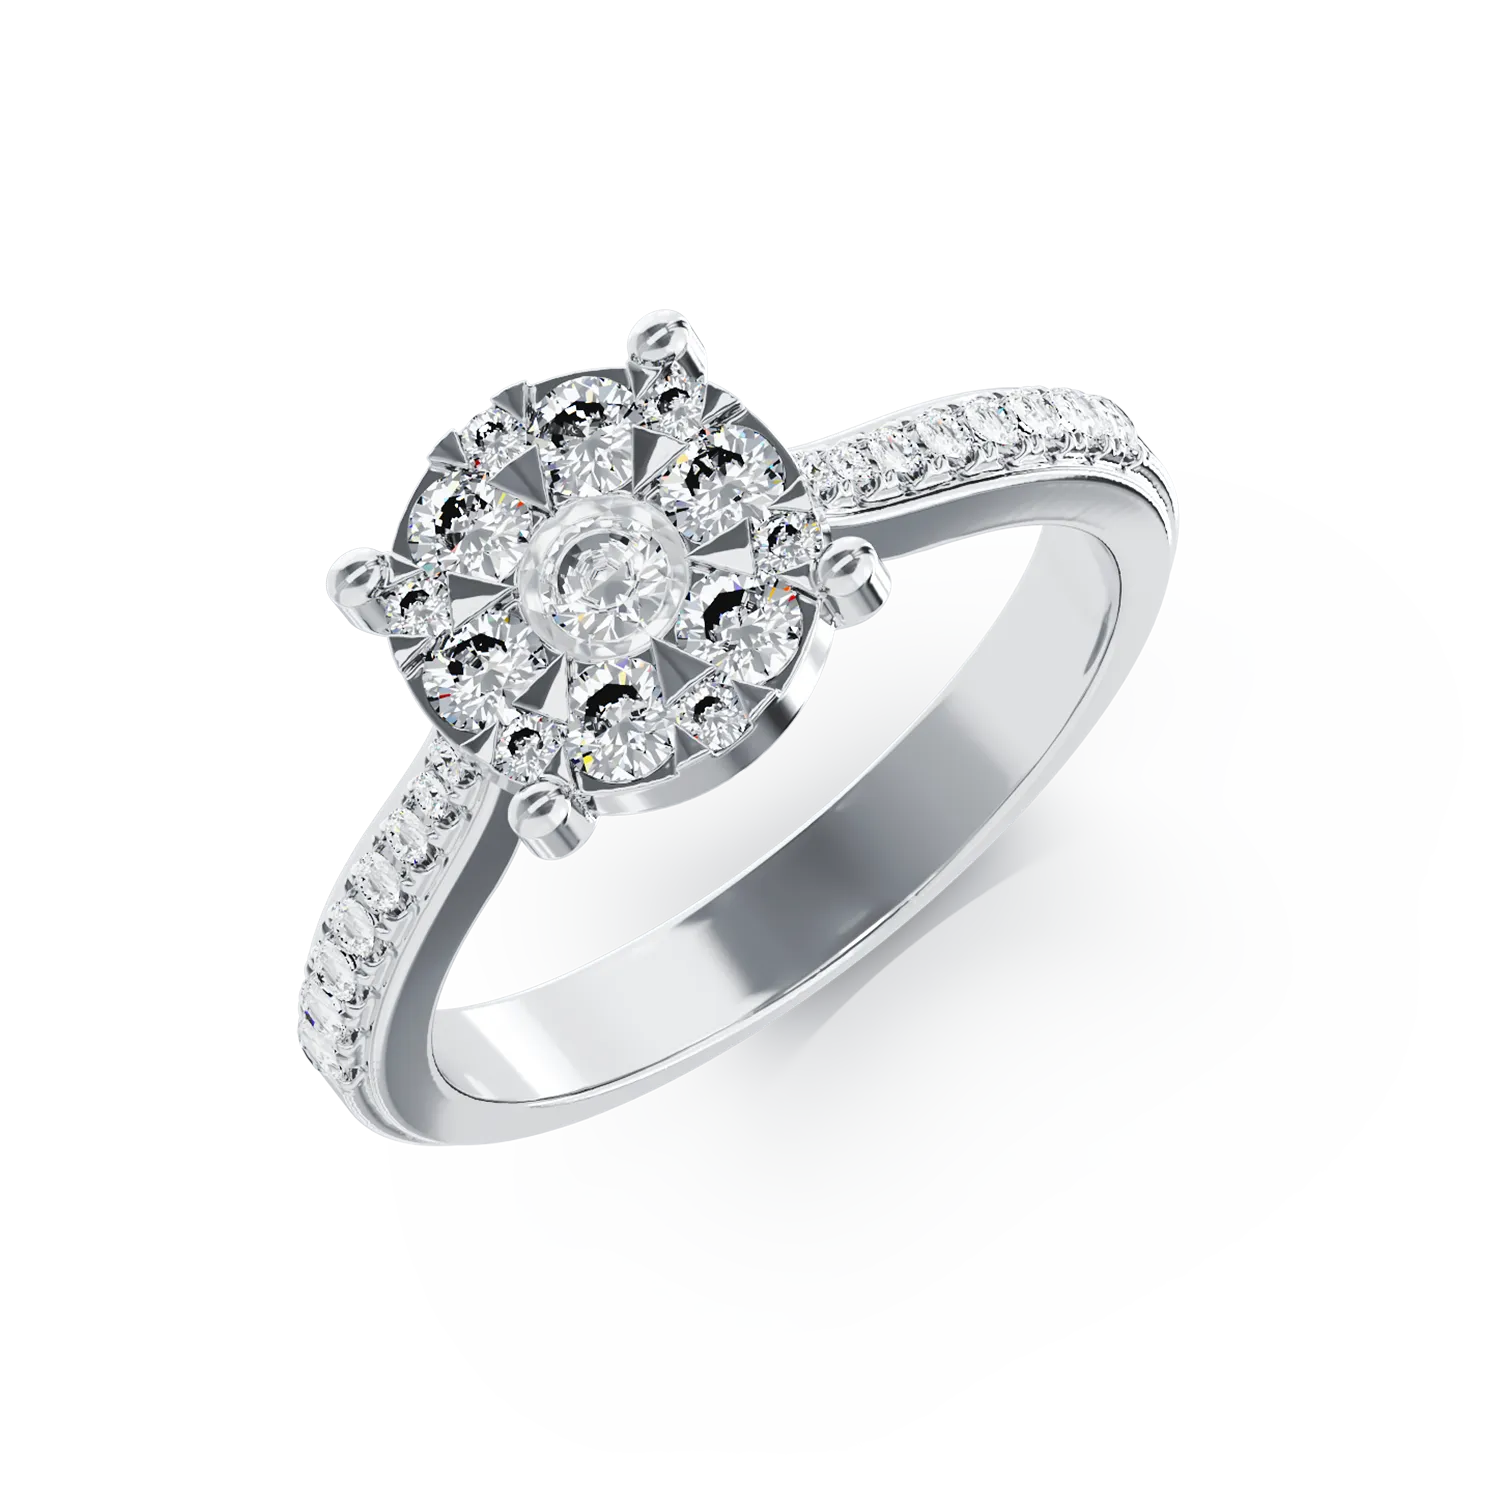 18K white gold engagement ring with 0.48ct diamonds